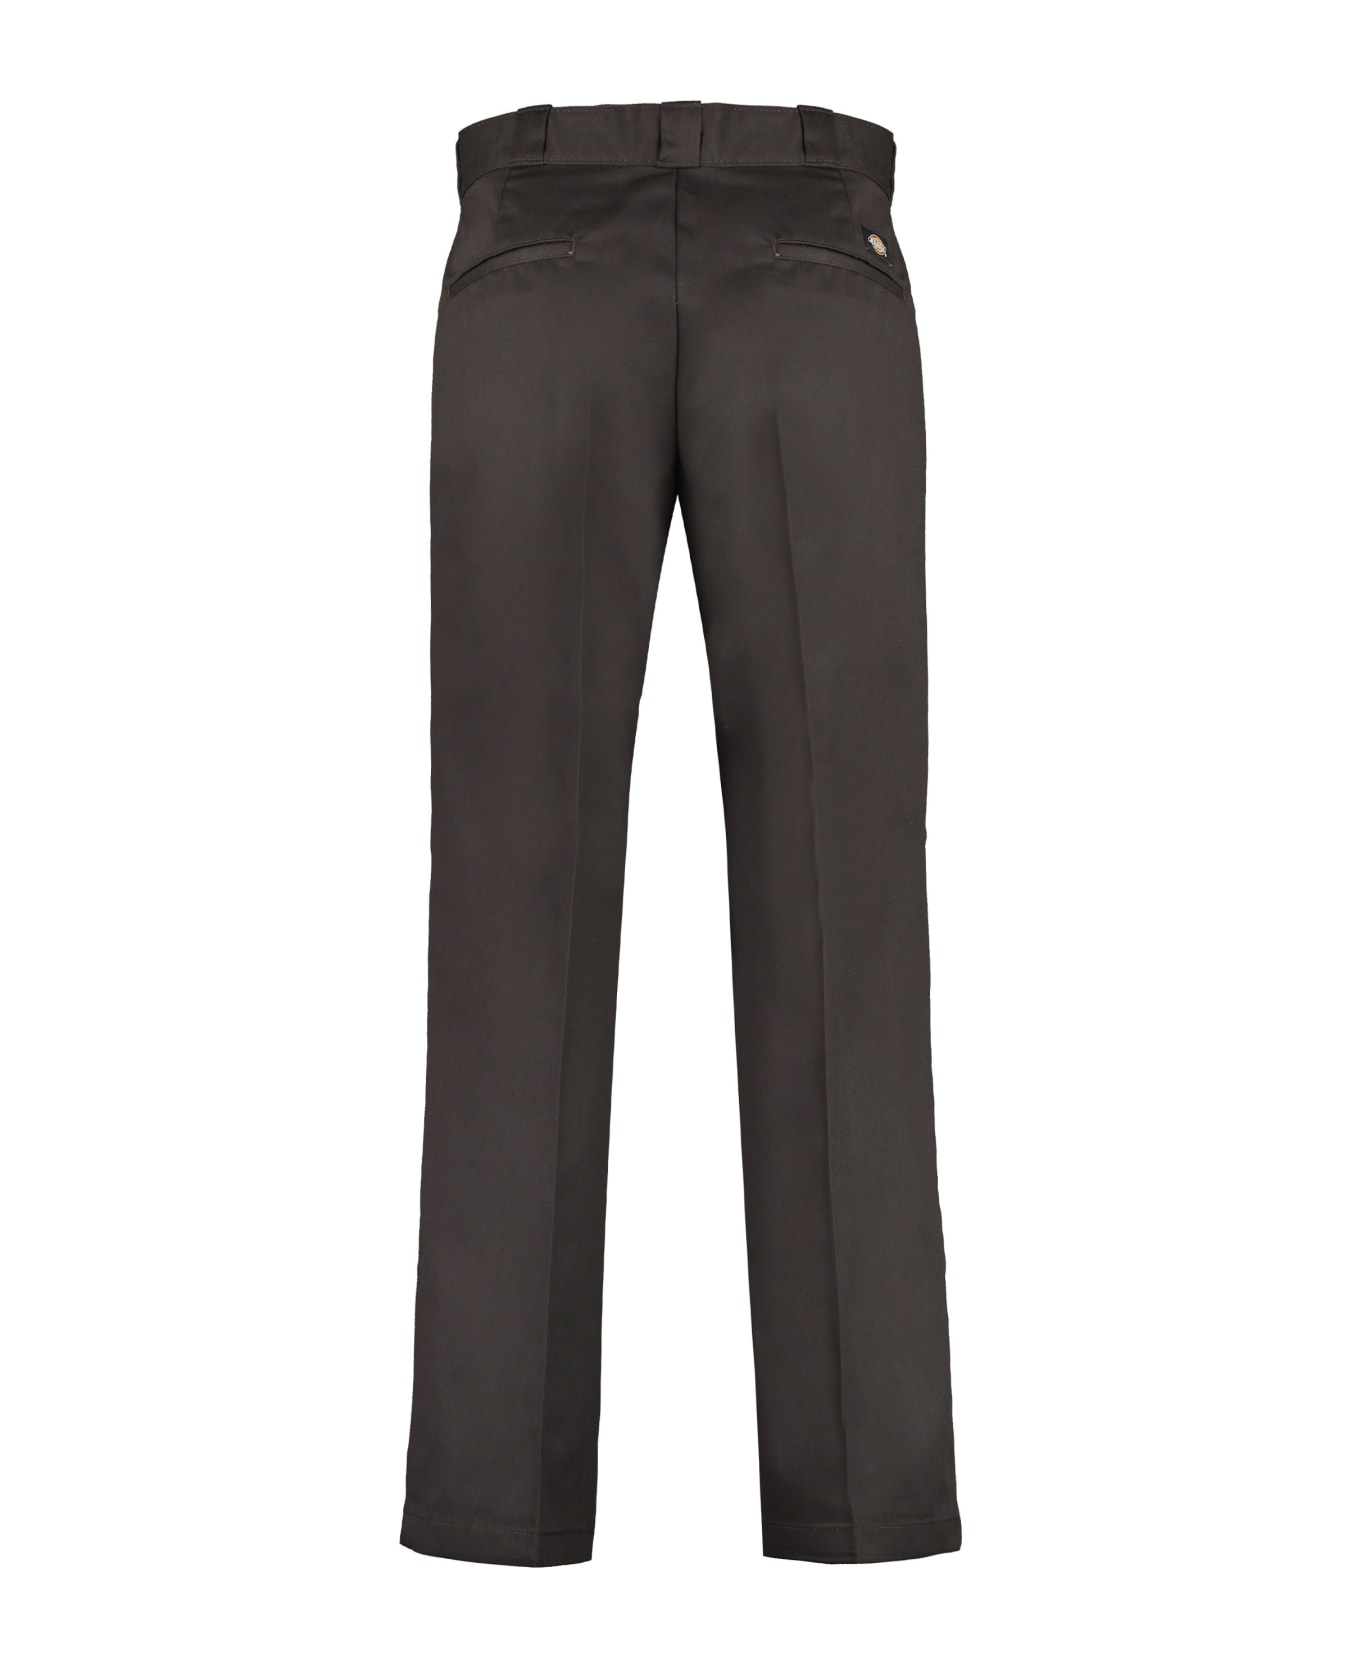 Dickies 874 Cotton-blend Trousers - brown